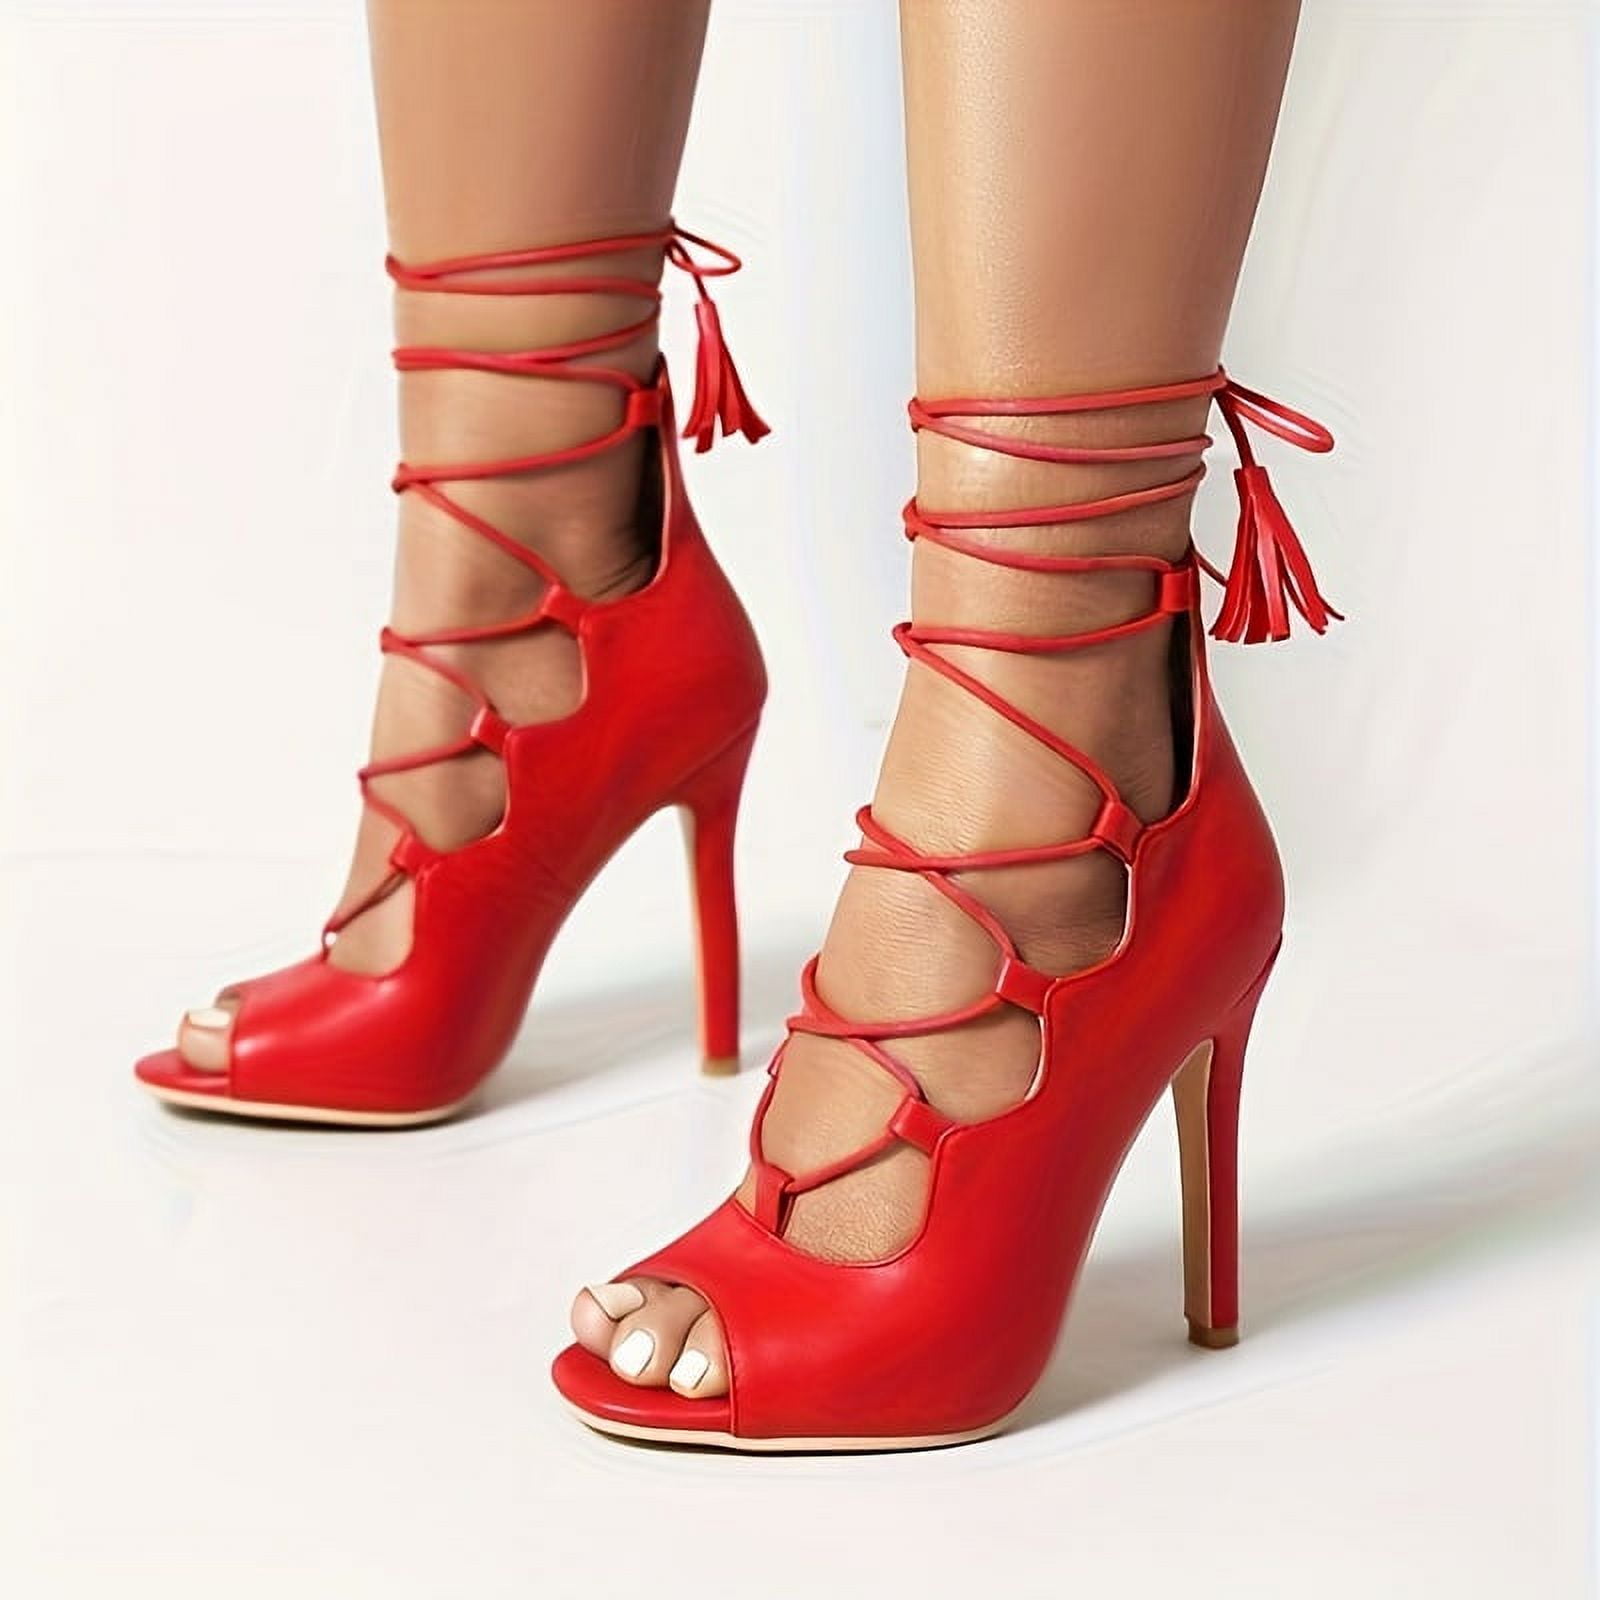 KINODAY Women Red Open Toe Lace Up High Heels Stiletto Heeled Ankle ...